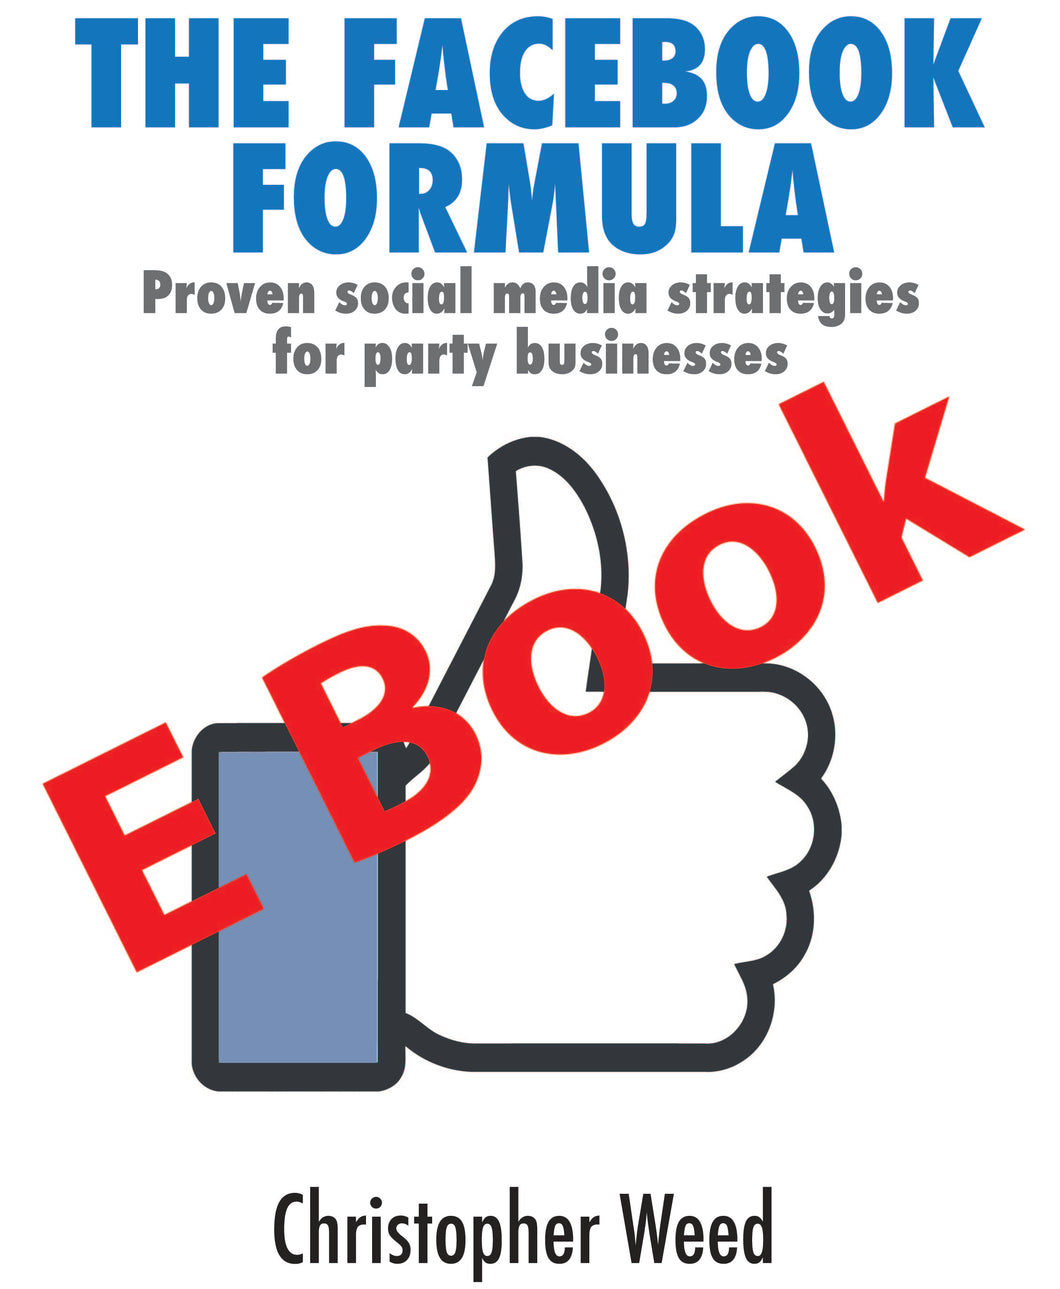 The Facebook Formula-Proven Social Media Strategies for Party Businesses E Book